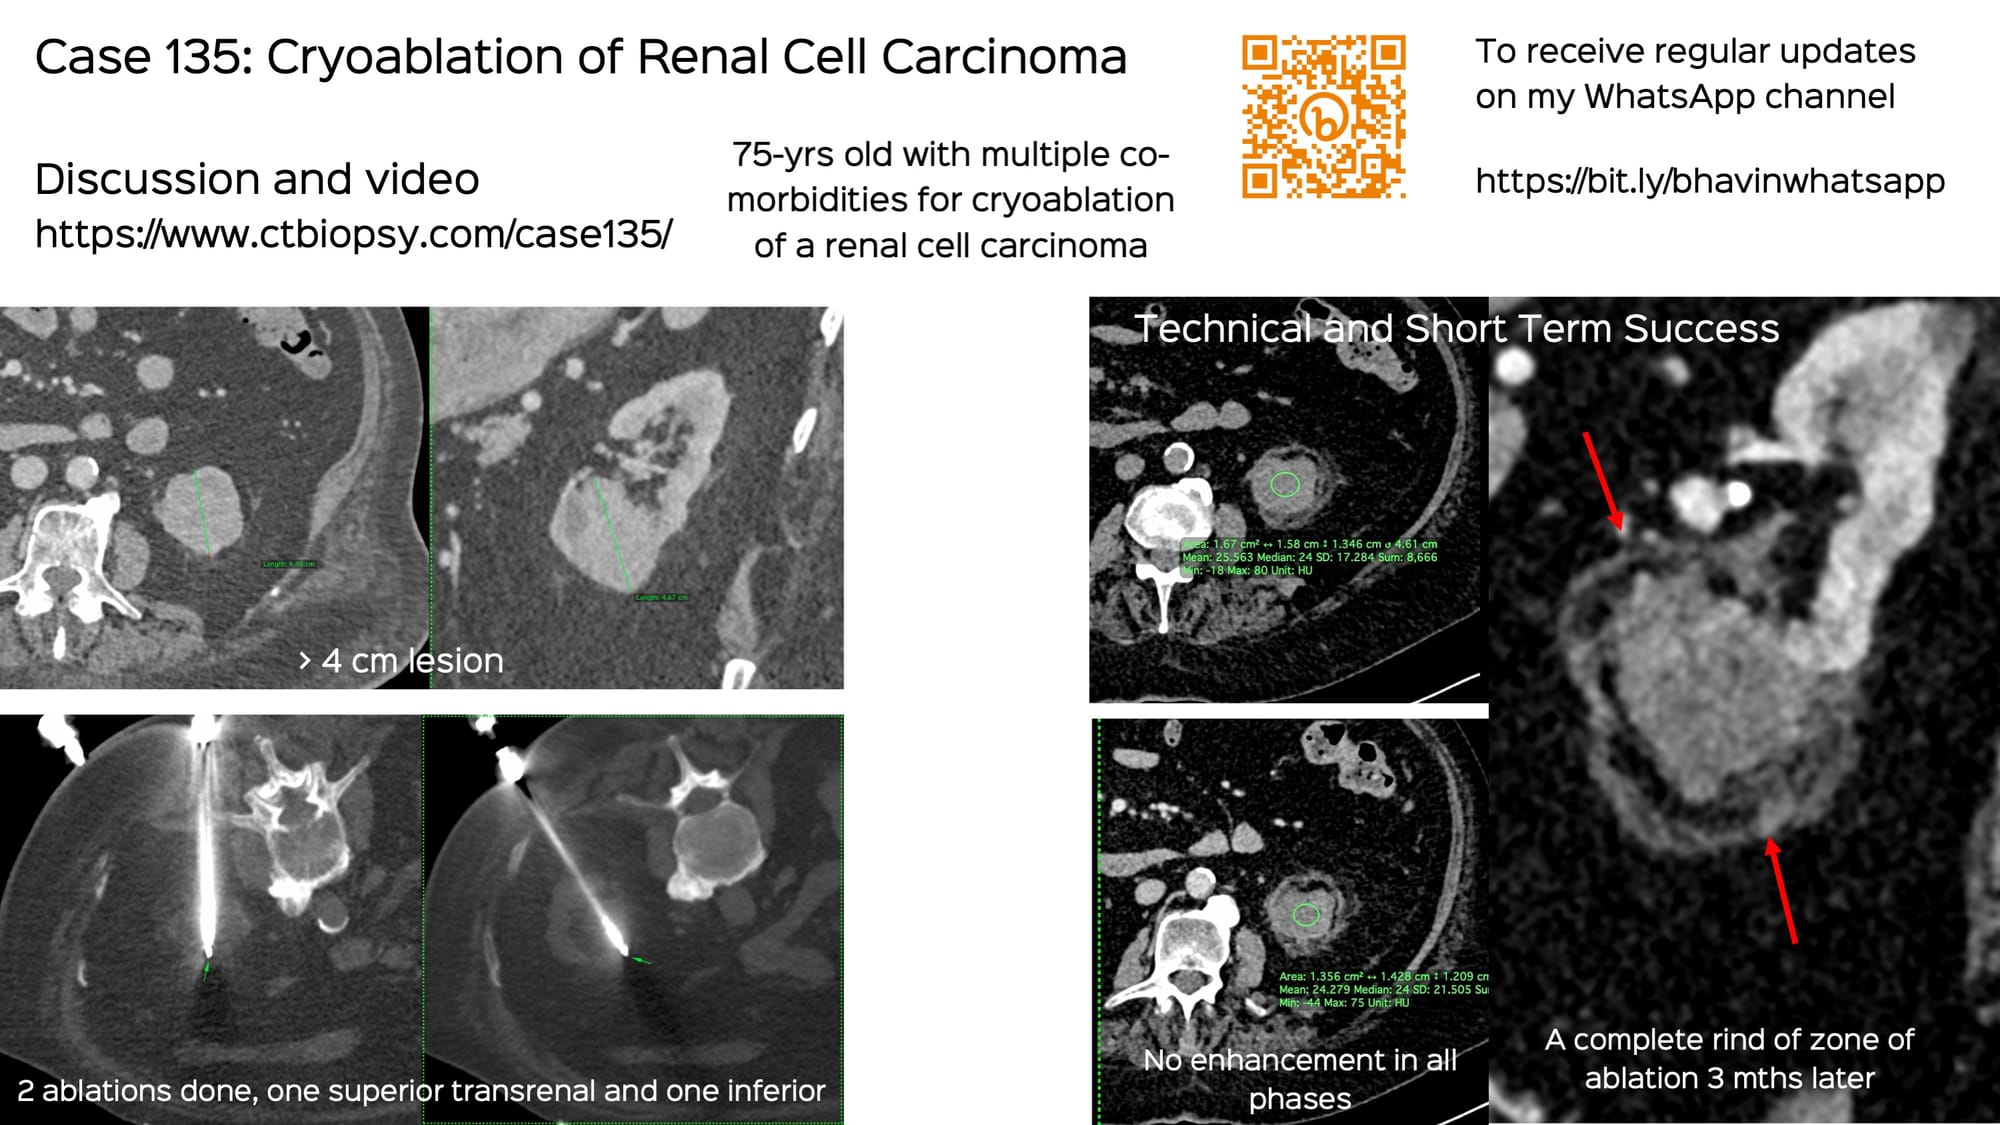 Case 135: Cryoablation of Renal Cell Carcinoma